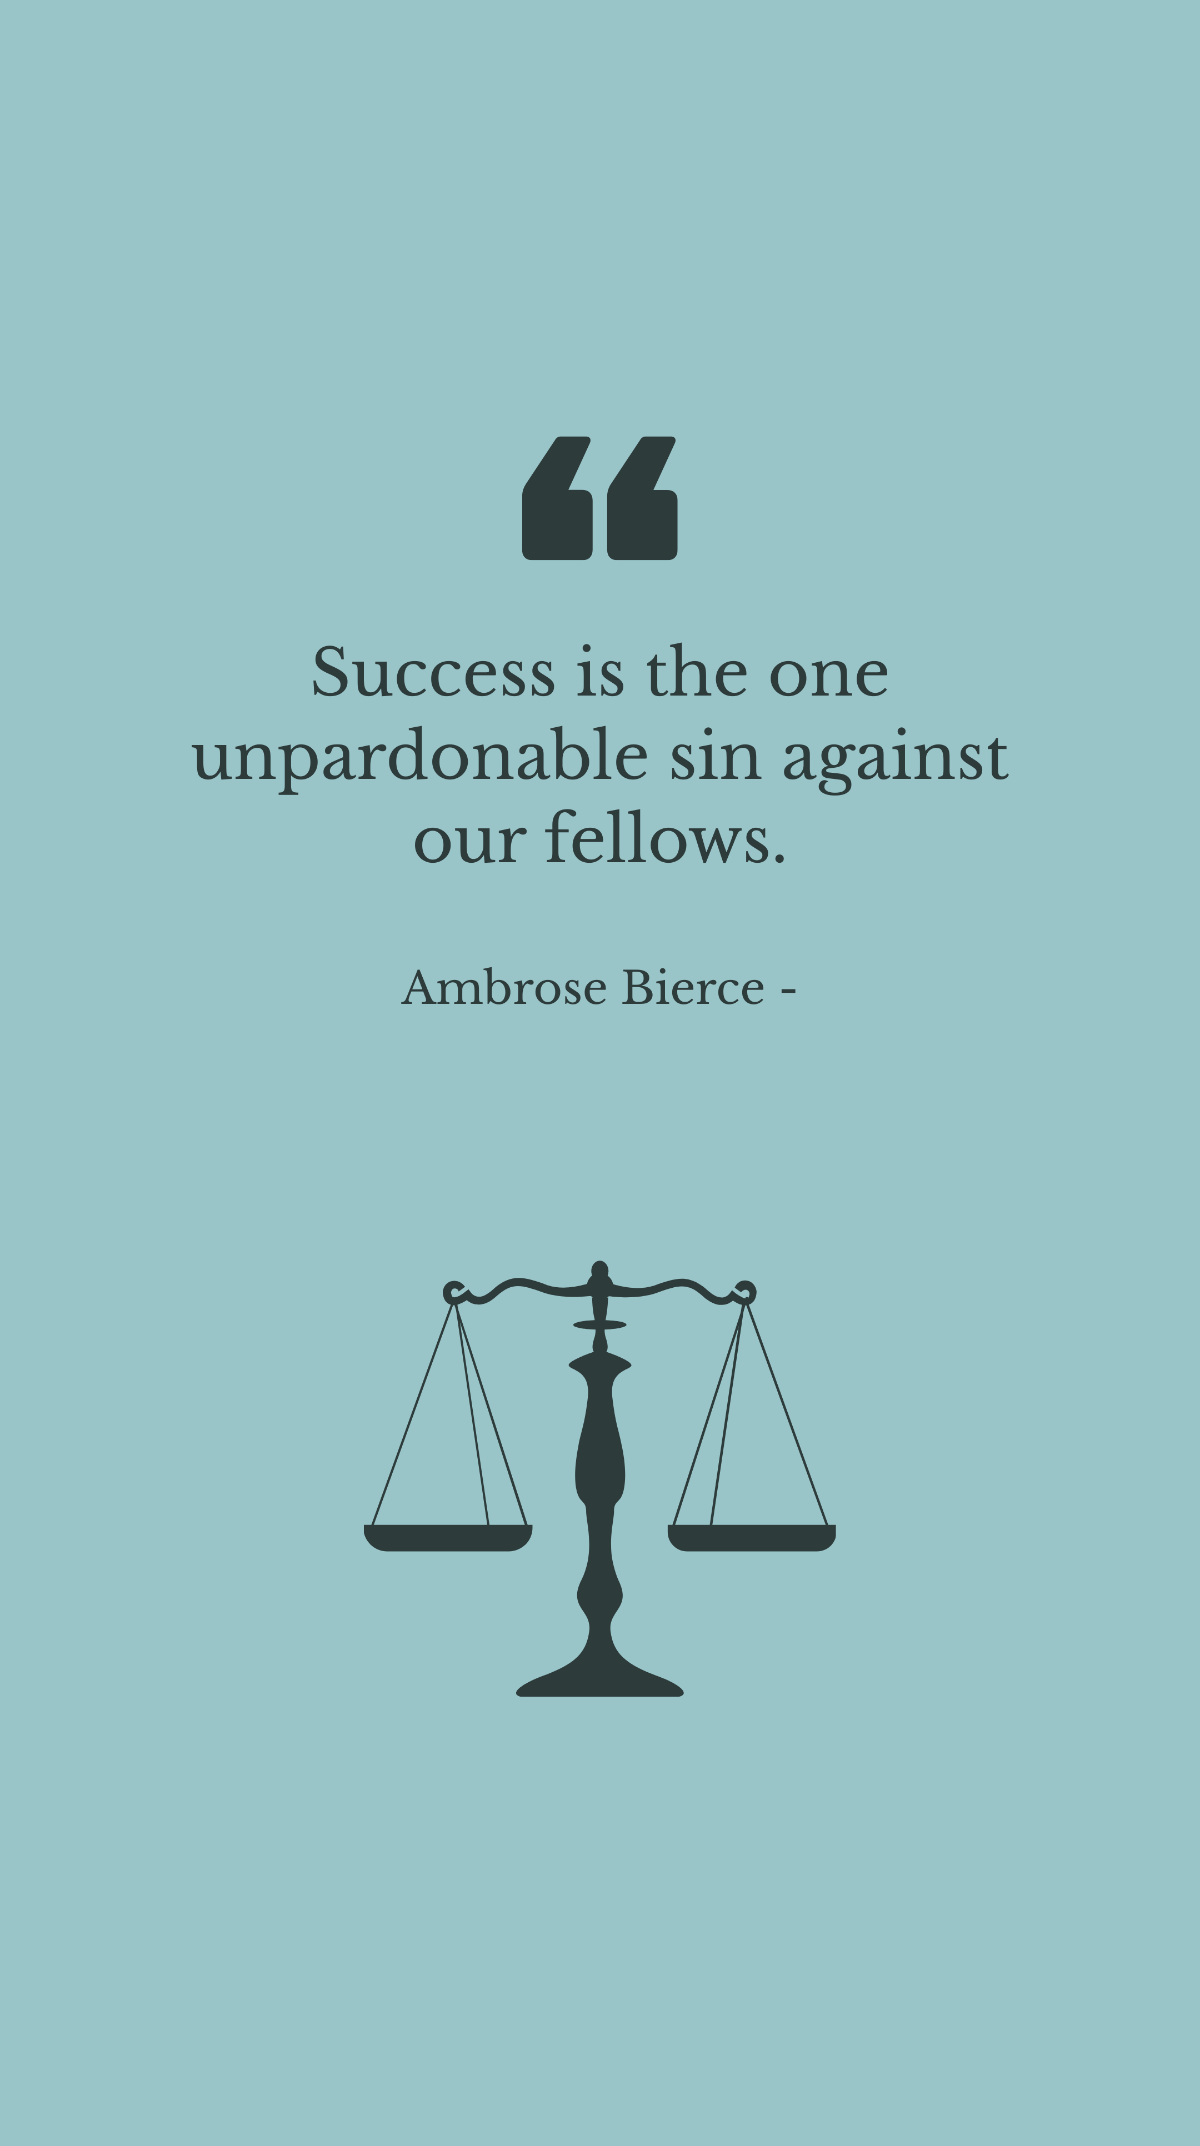 Ambrose Bierce - Success is the one unpardonable sin against our fellows. Template